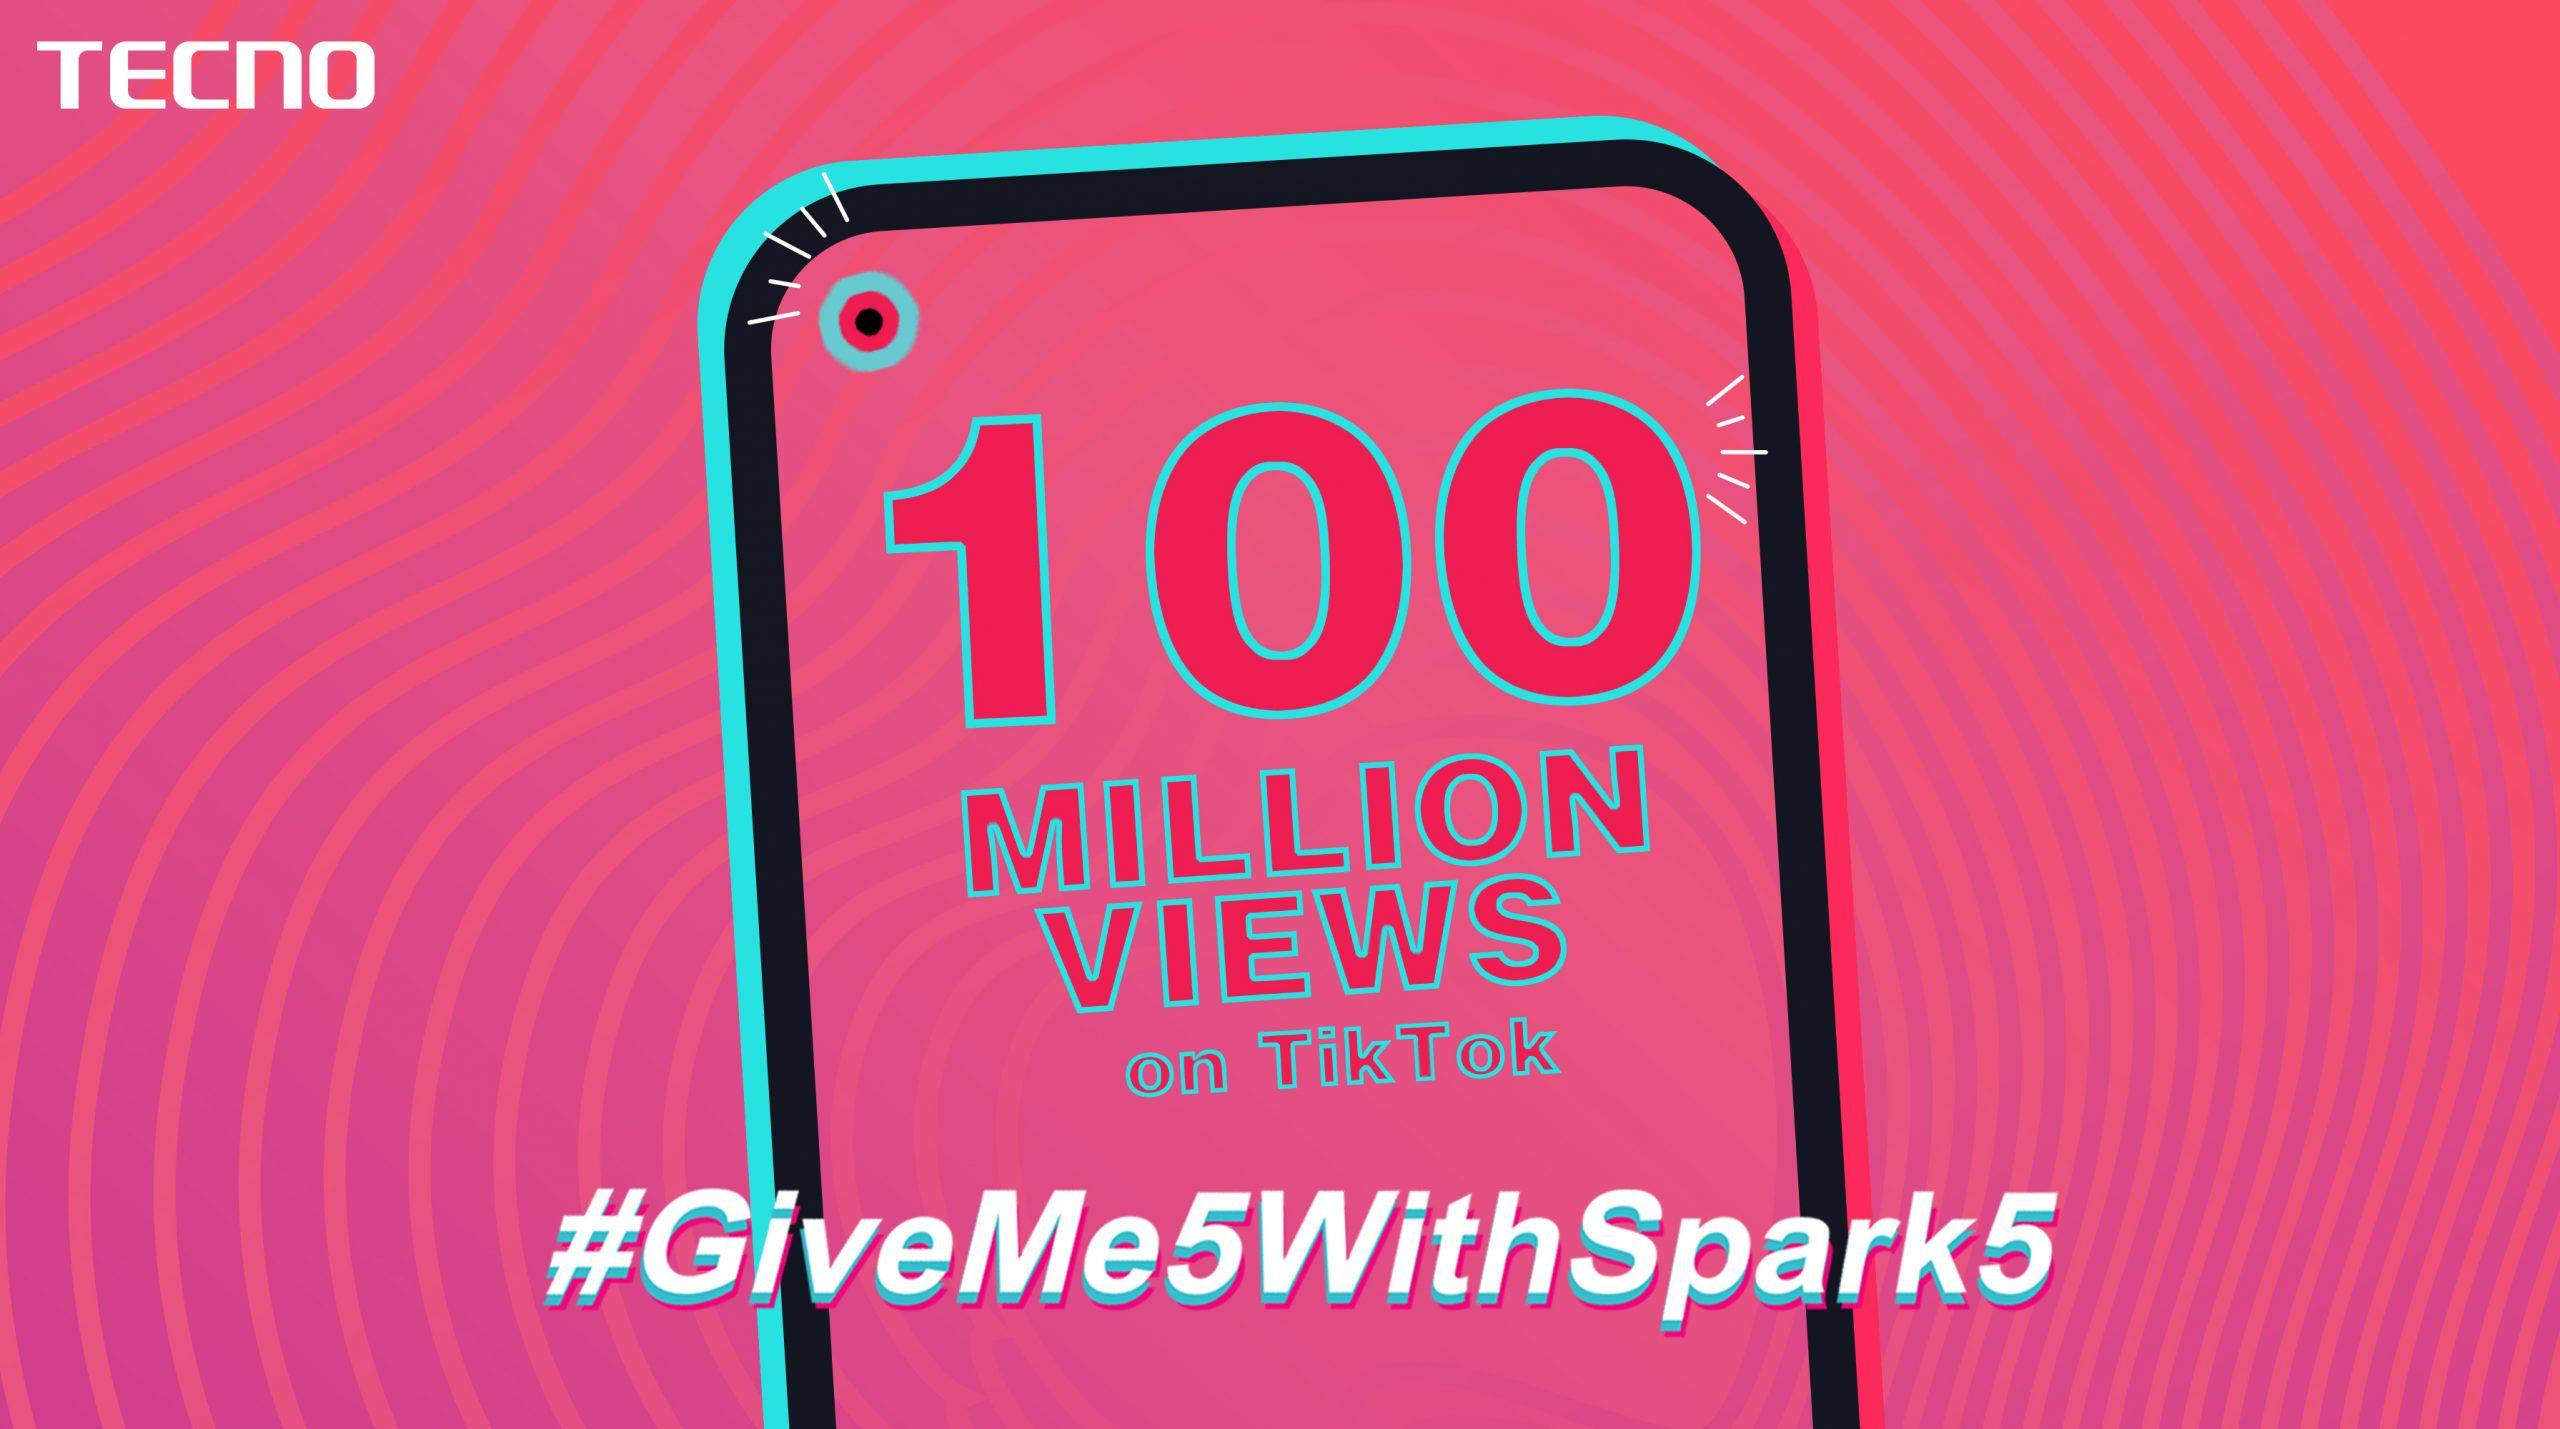 TECNO’s #GiveMe5withSpark5 Challenge Breaks A Record of 100M Views on Social Media